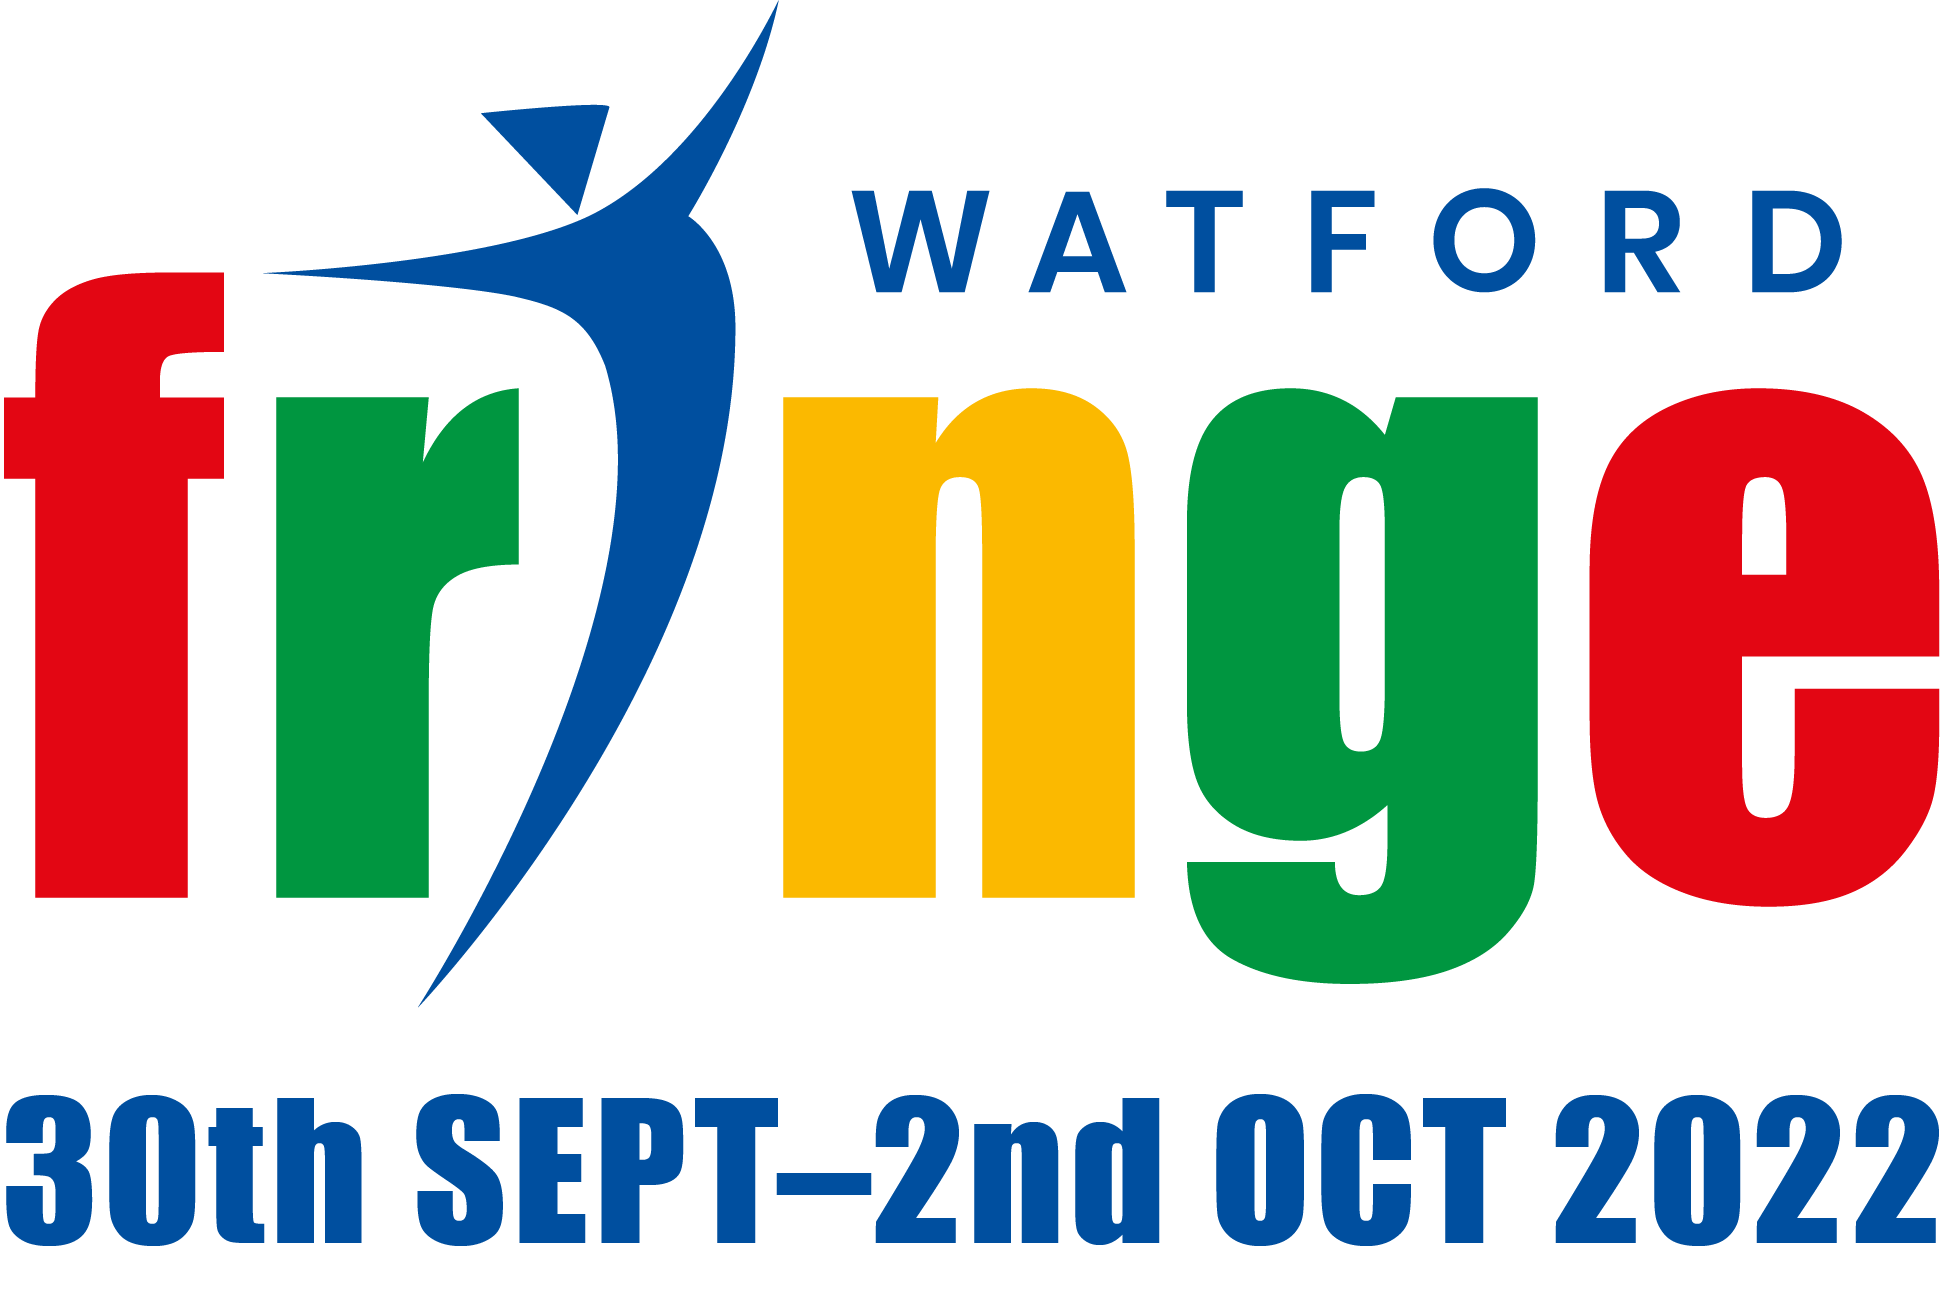 Watford Fringe 2022 open for applications to perform